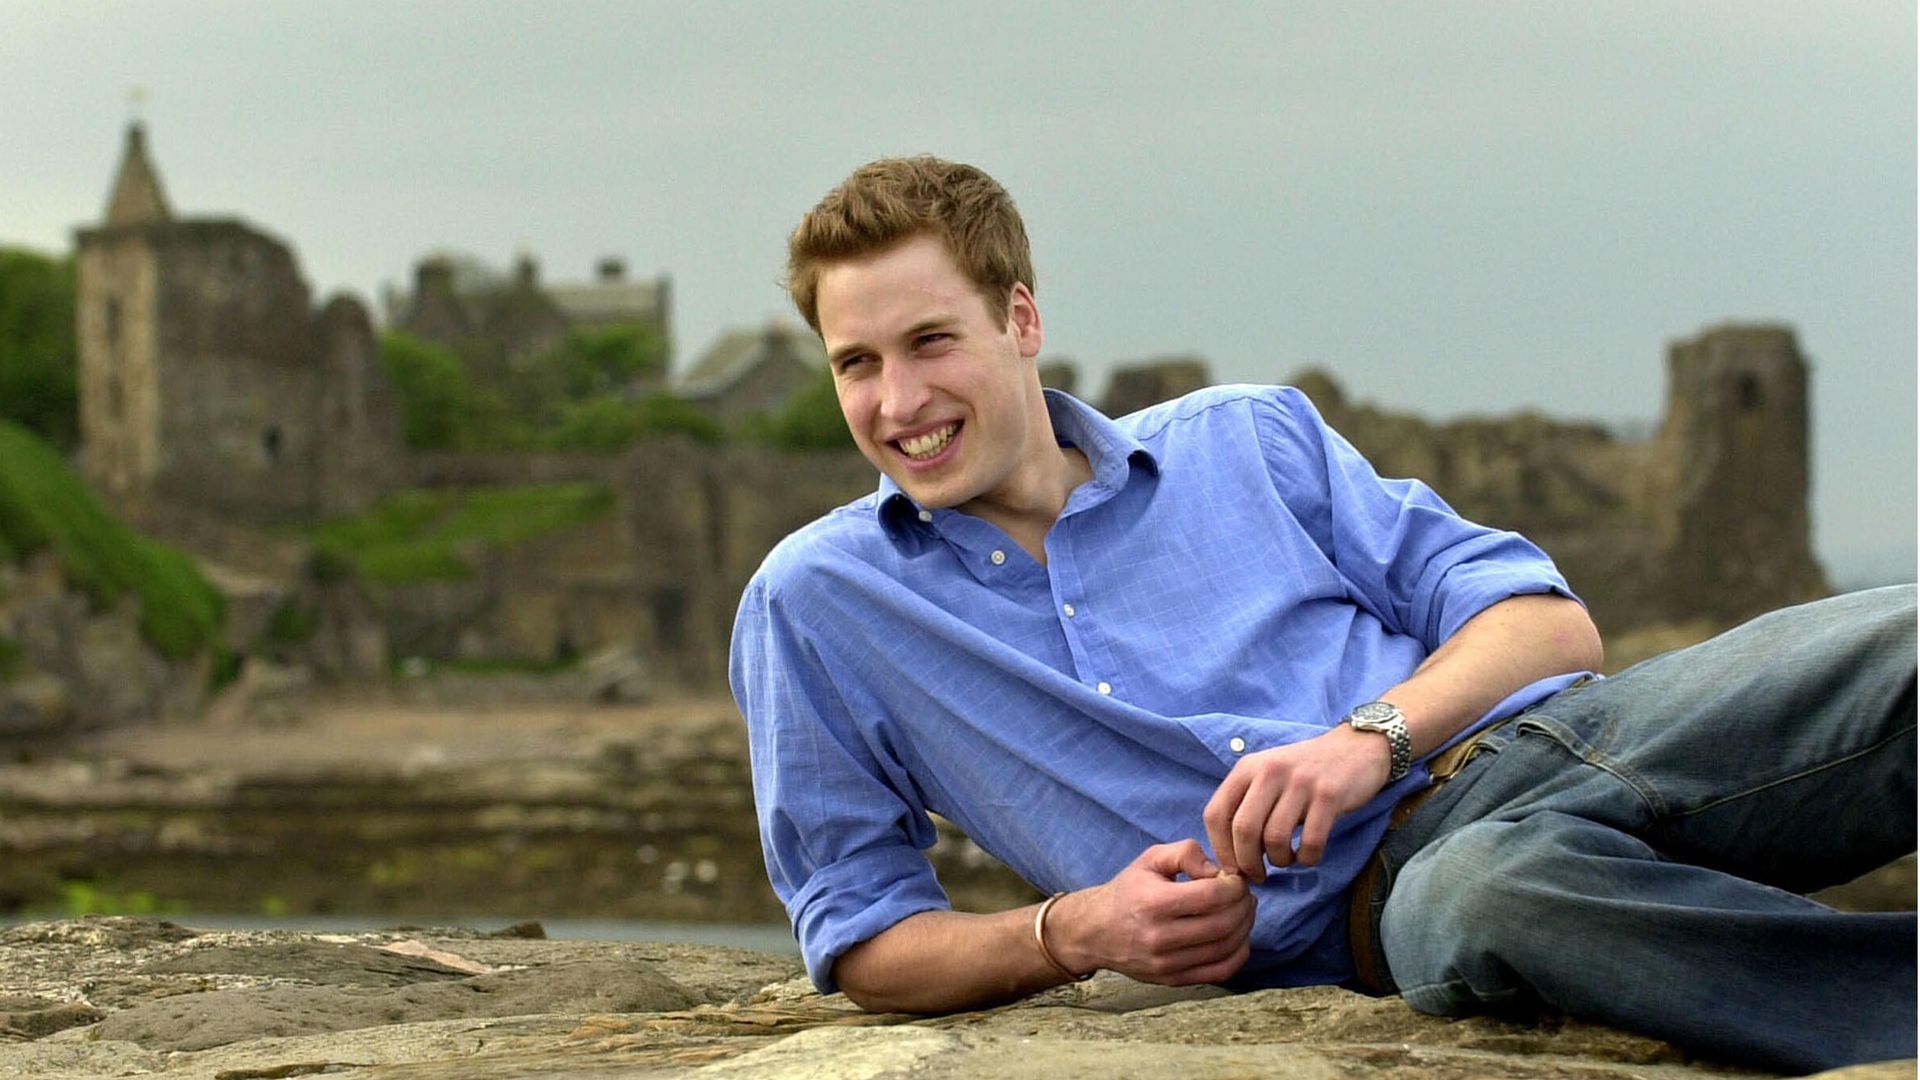 Prince William relaxes on the beach while at university